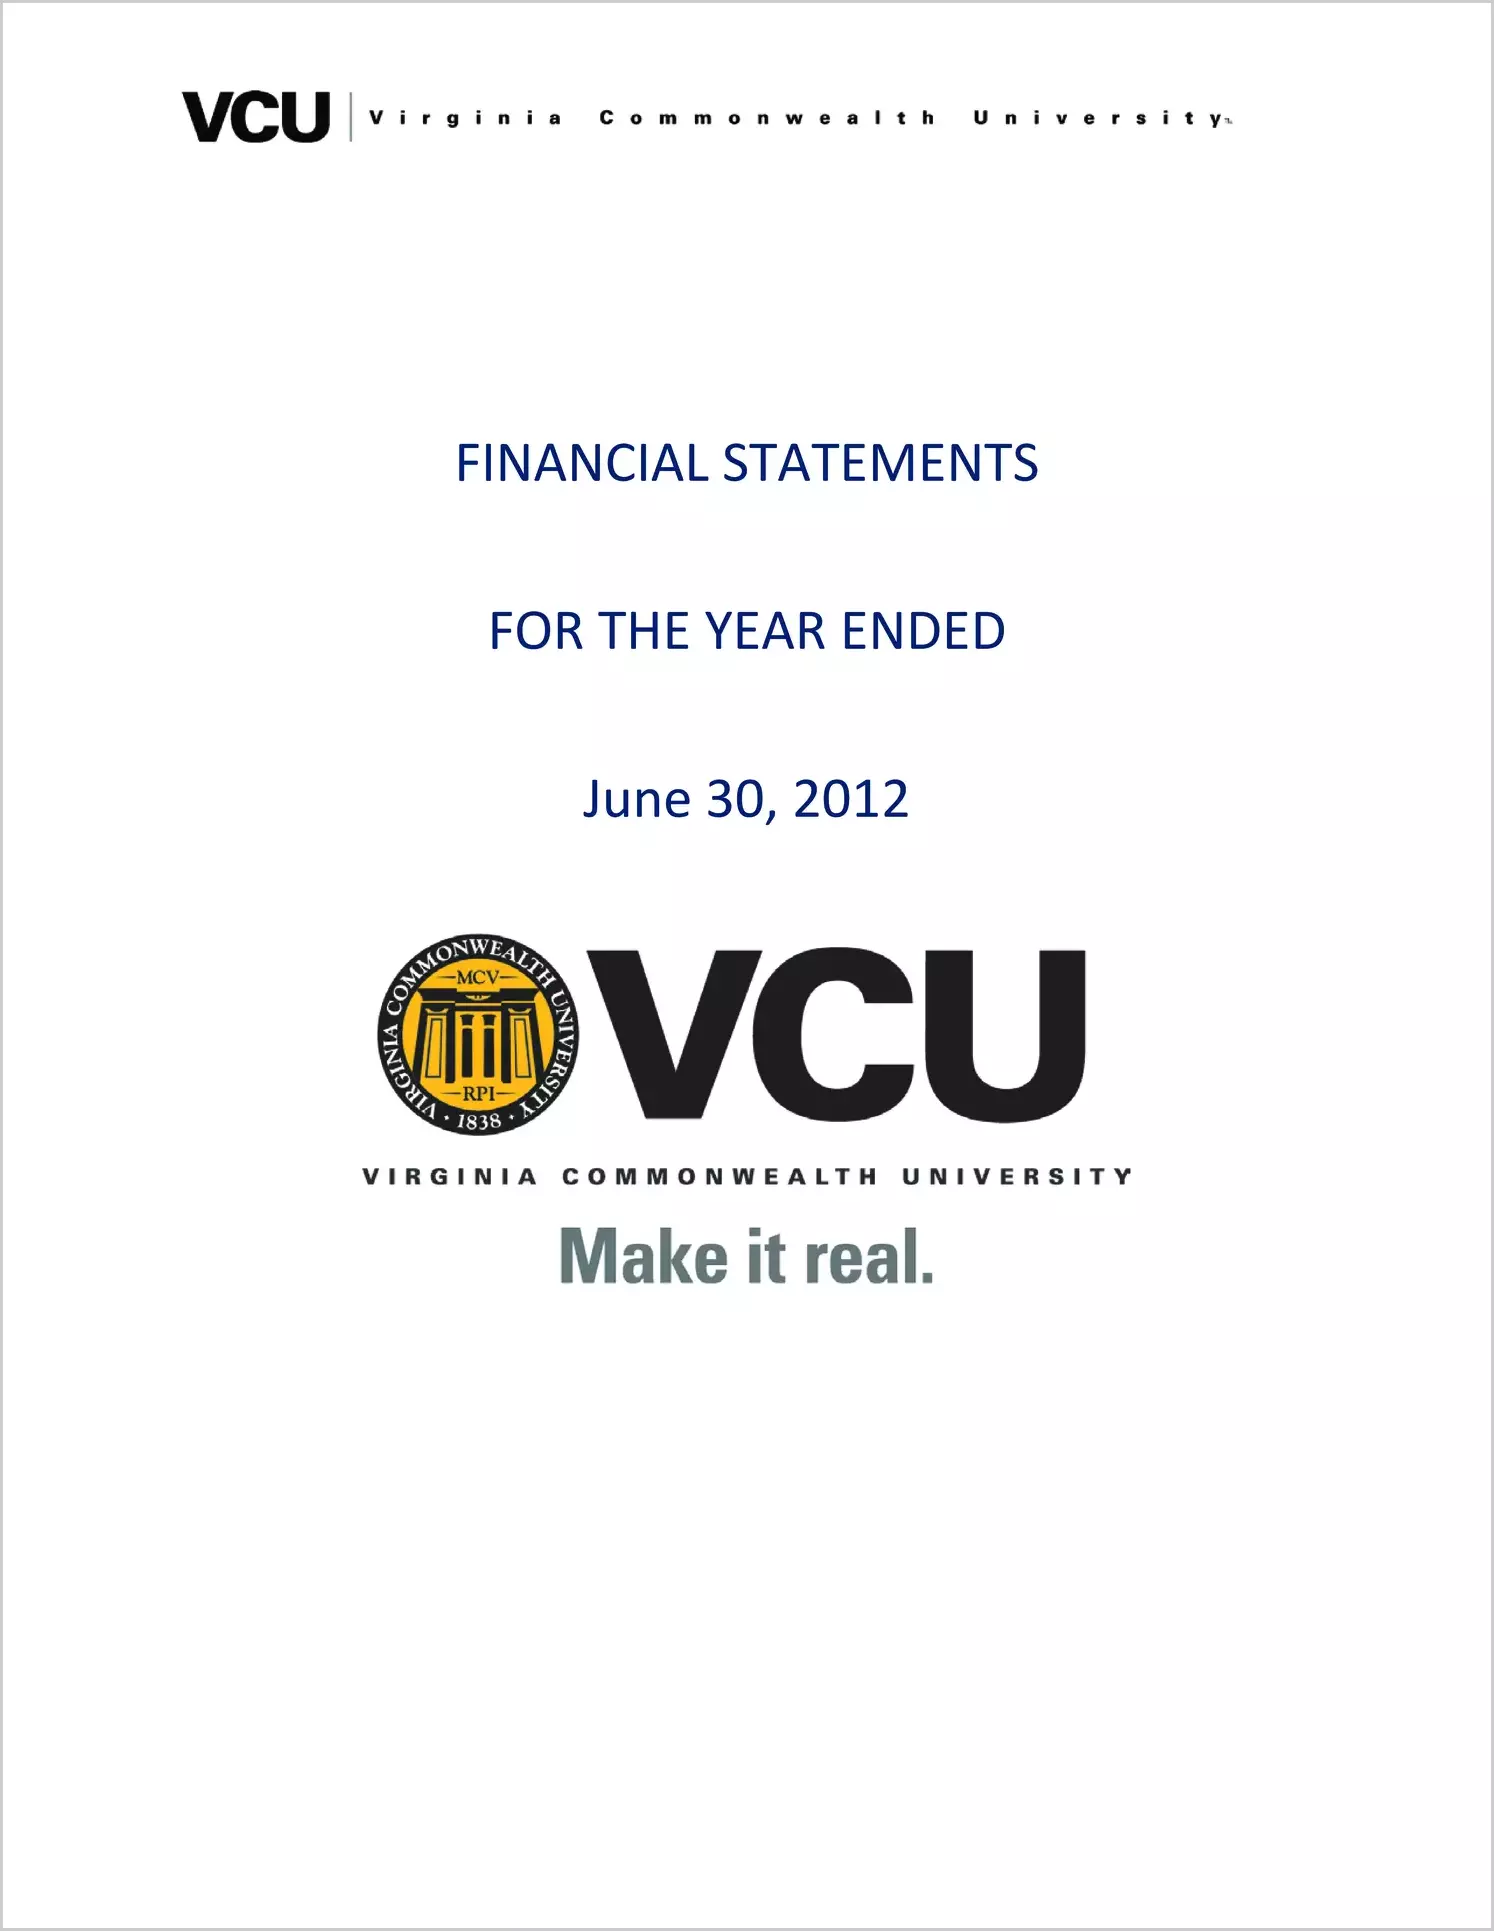 Virginia Commonwealth University Finanical Statements Report for the year ended June 30, 2012